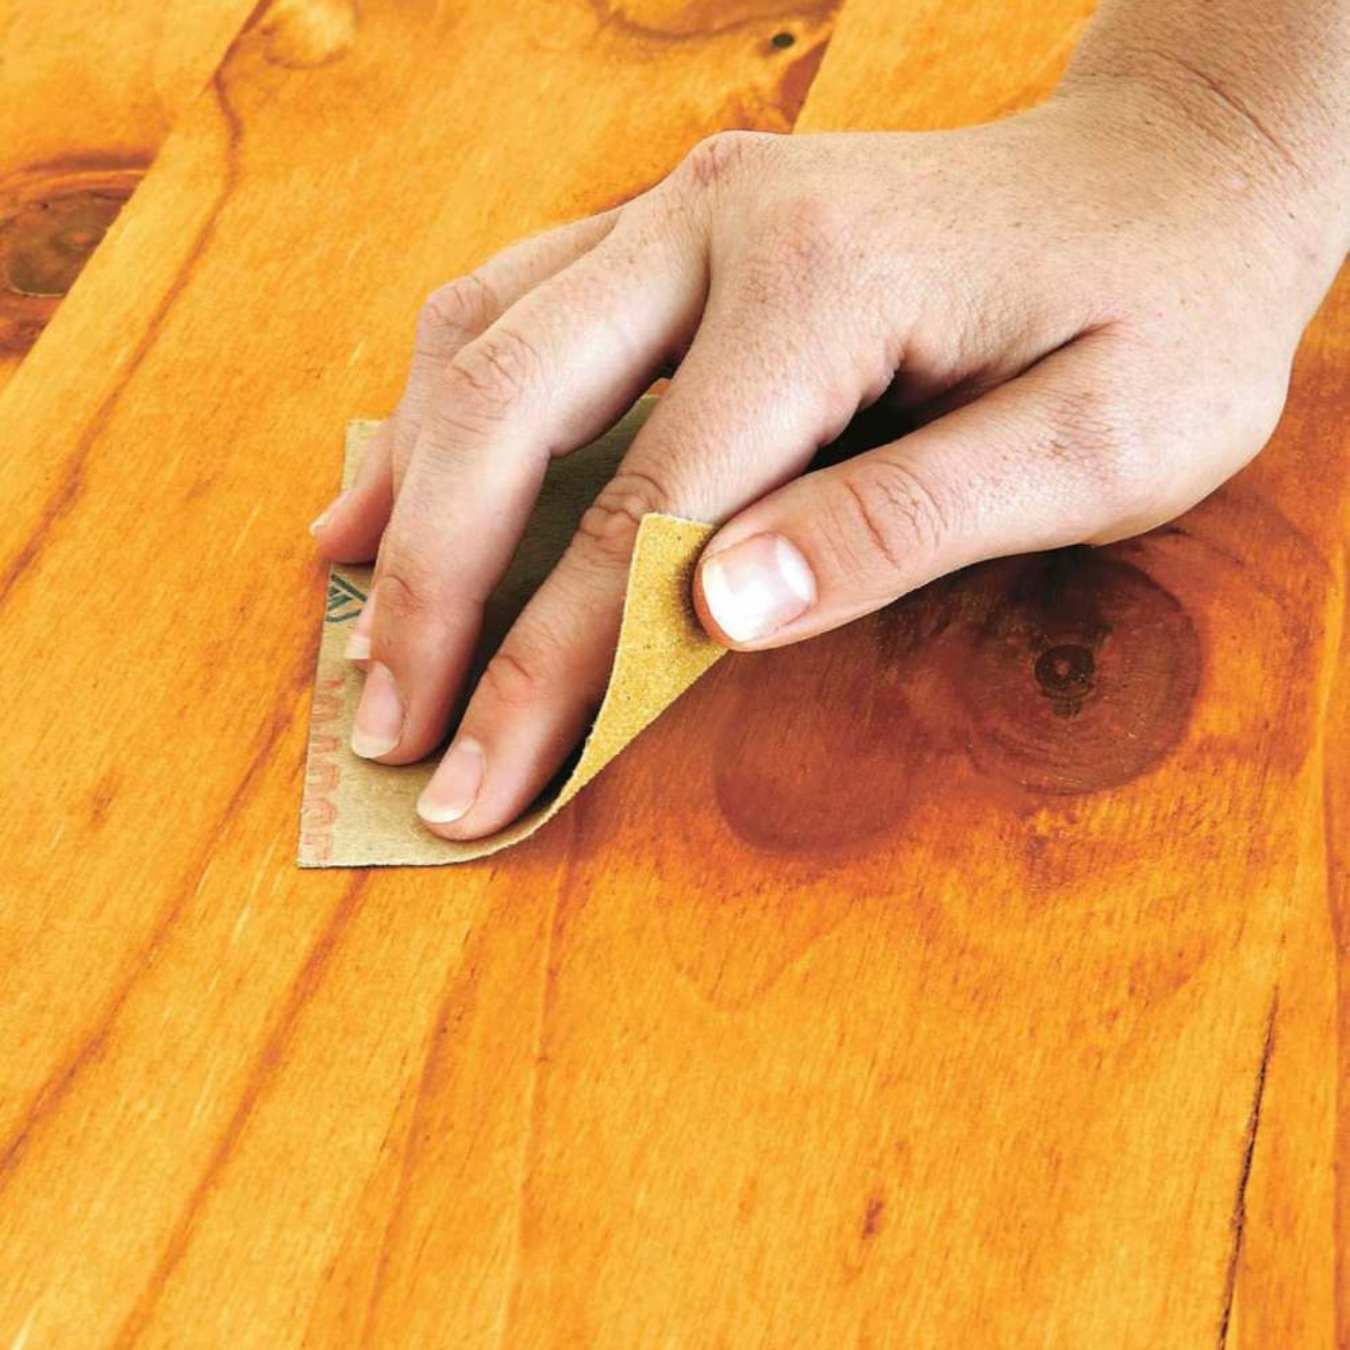 What Grit Sandpaper For Refinishing Wood Table